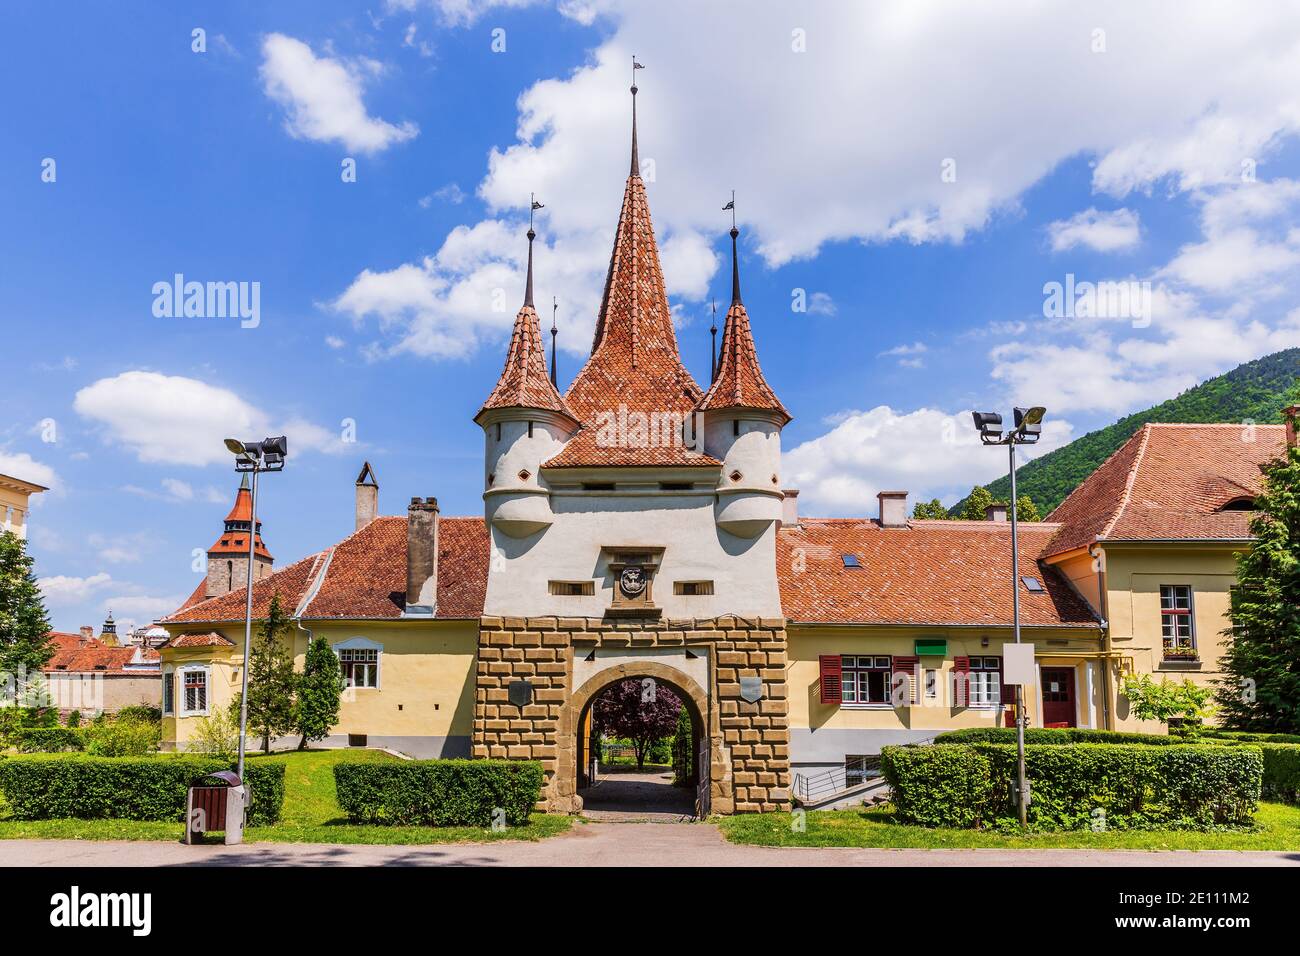 Brasov, Romania. Catherine gate. City gate from the medieval times. Stock Photo